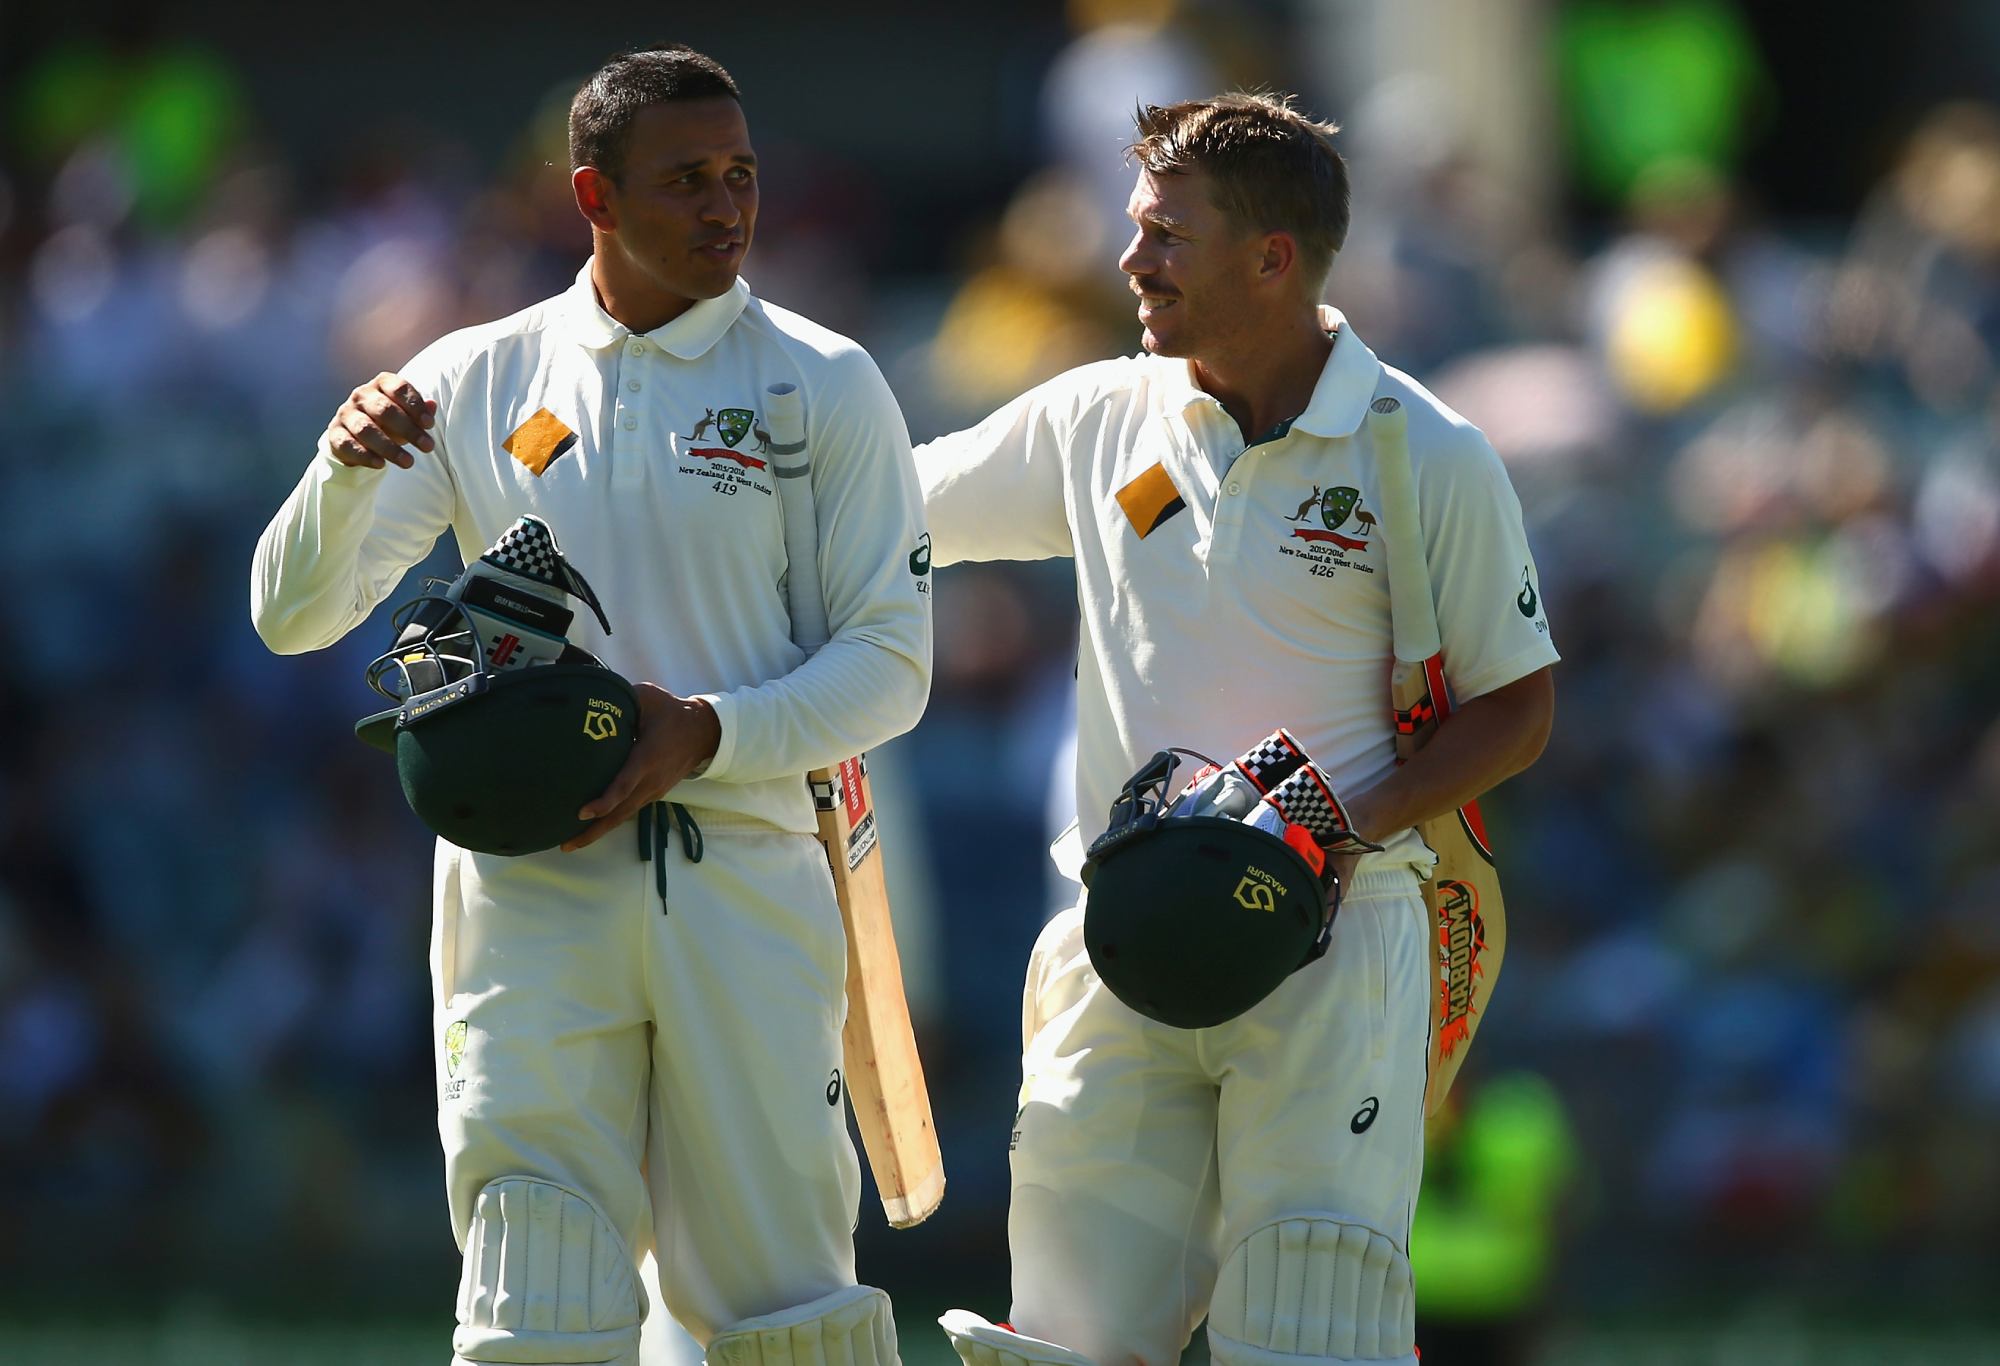 PERTH, AUSTRALIA - NOVEMBER 13: Usman Khawaja and David Warner of Australia leaves the ground at tea during day one of the second Test match between Australia and New Zealand at WACA on November 13, 2015 in Perth, Australia. (Photo by Ryan Pierse - CA/Cricket Australia via Getty Images/Getty Images)